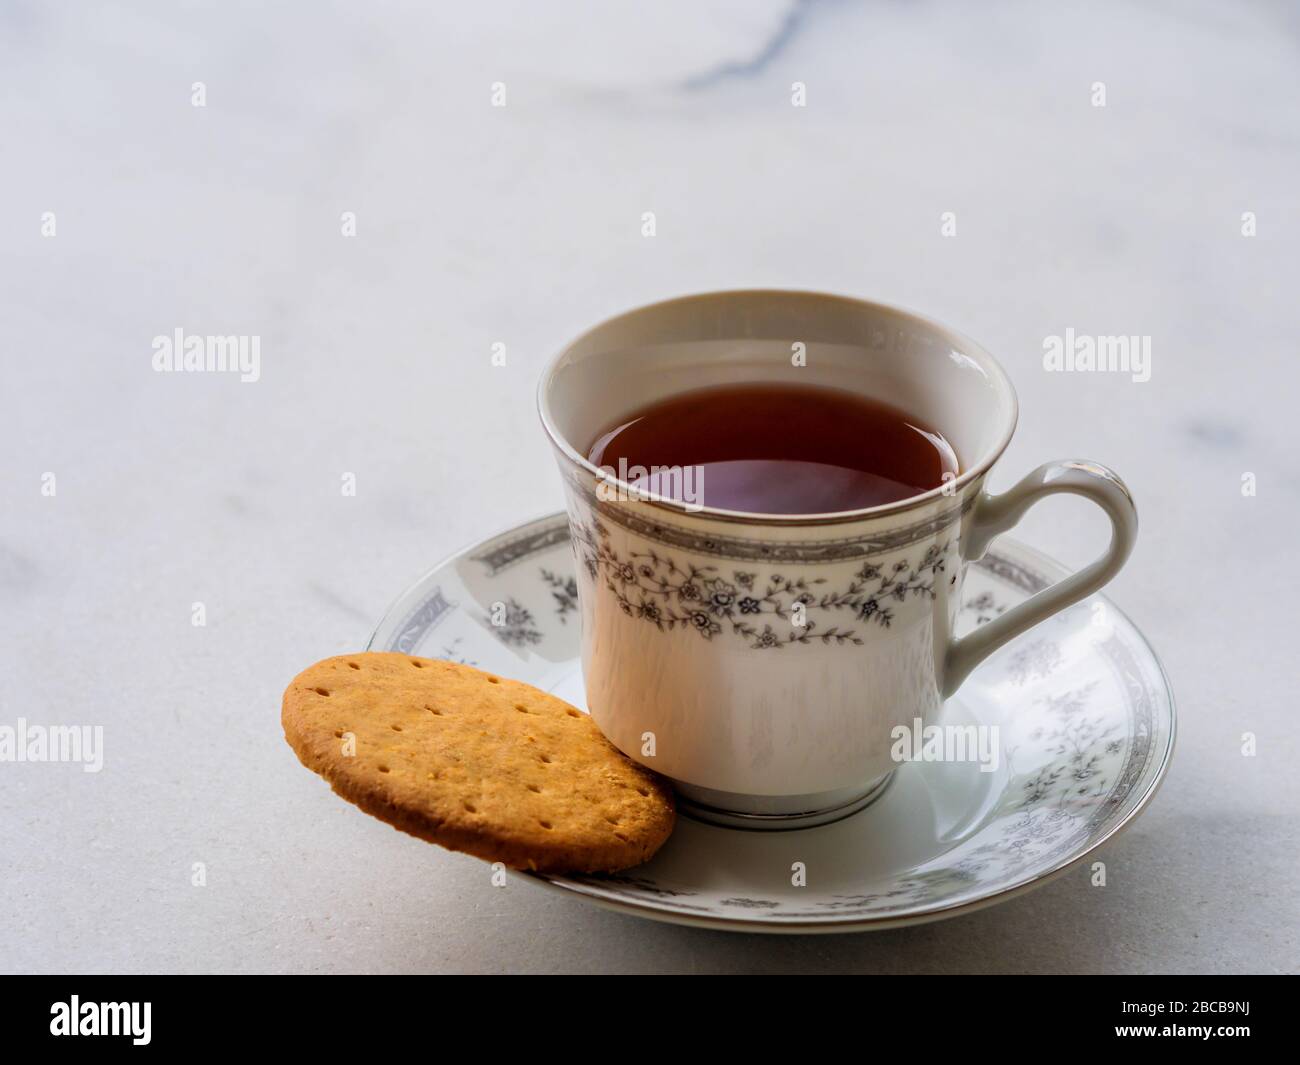 English tea in a fine porcelain china cup with a digestive biscuit. Tea-break, afternoon tea concept Stock Photo